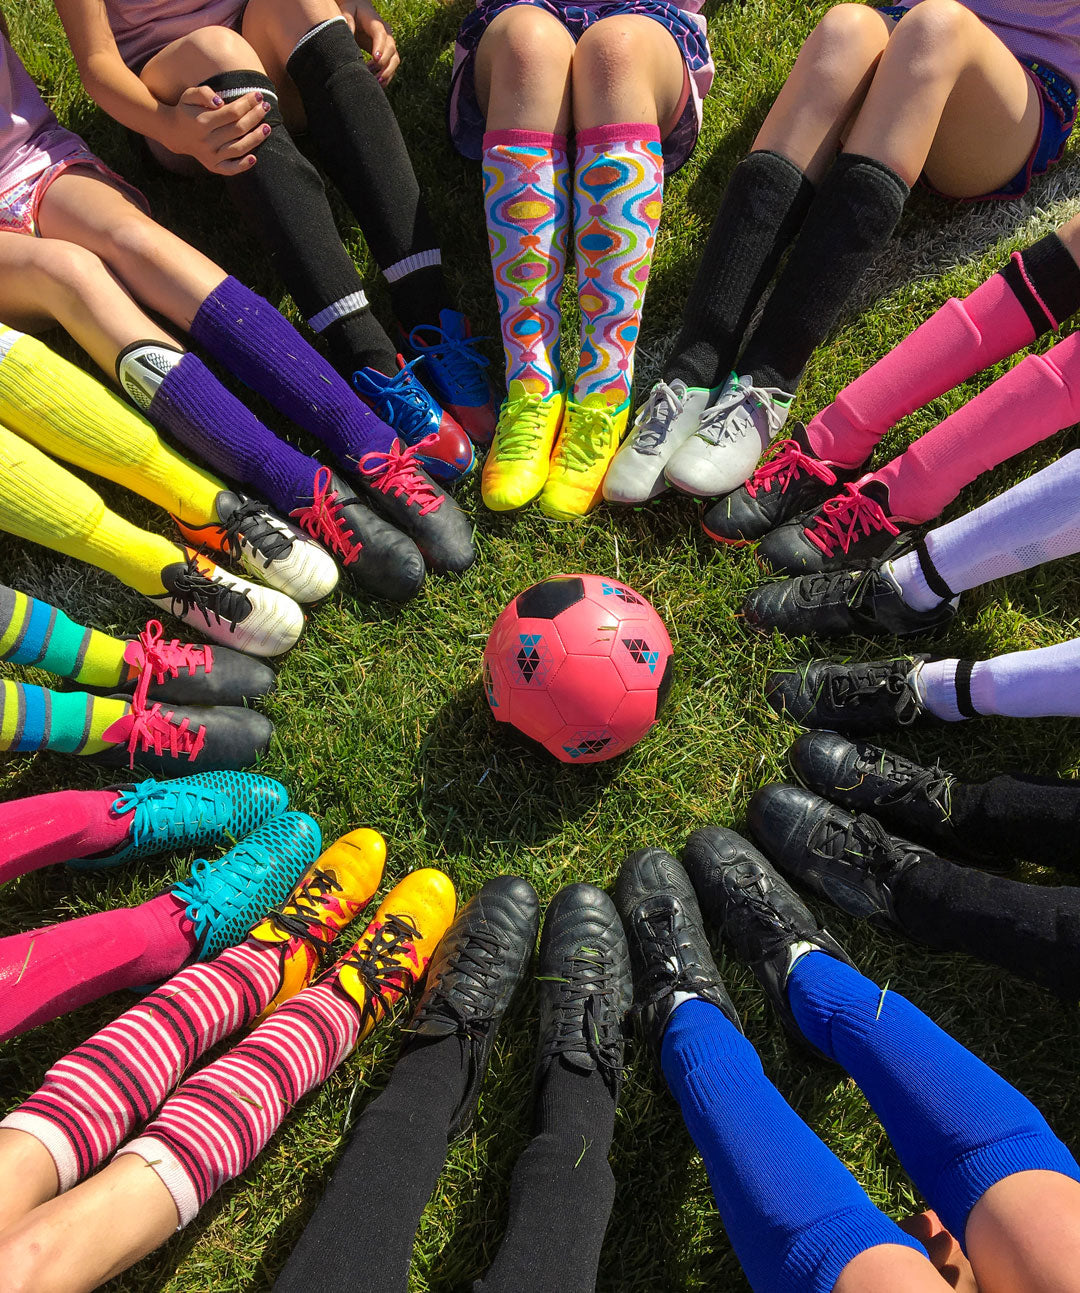 Soccer players show off their colorful socks sitting in a circle around a pink soccer ball.